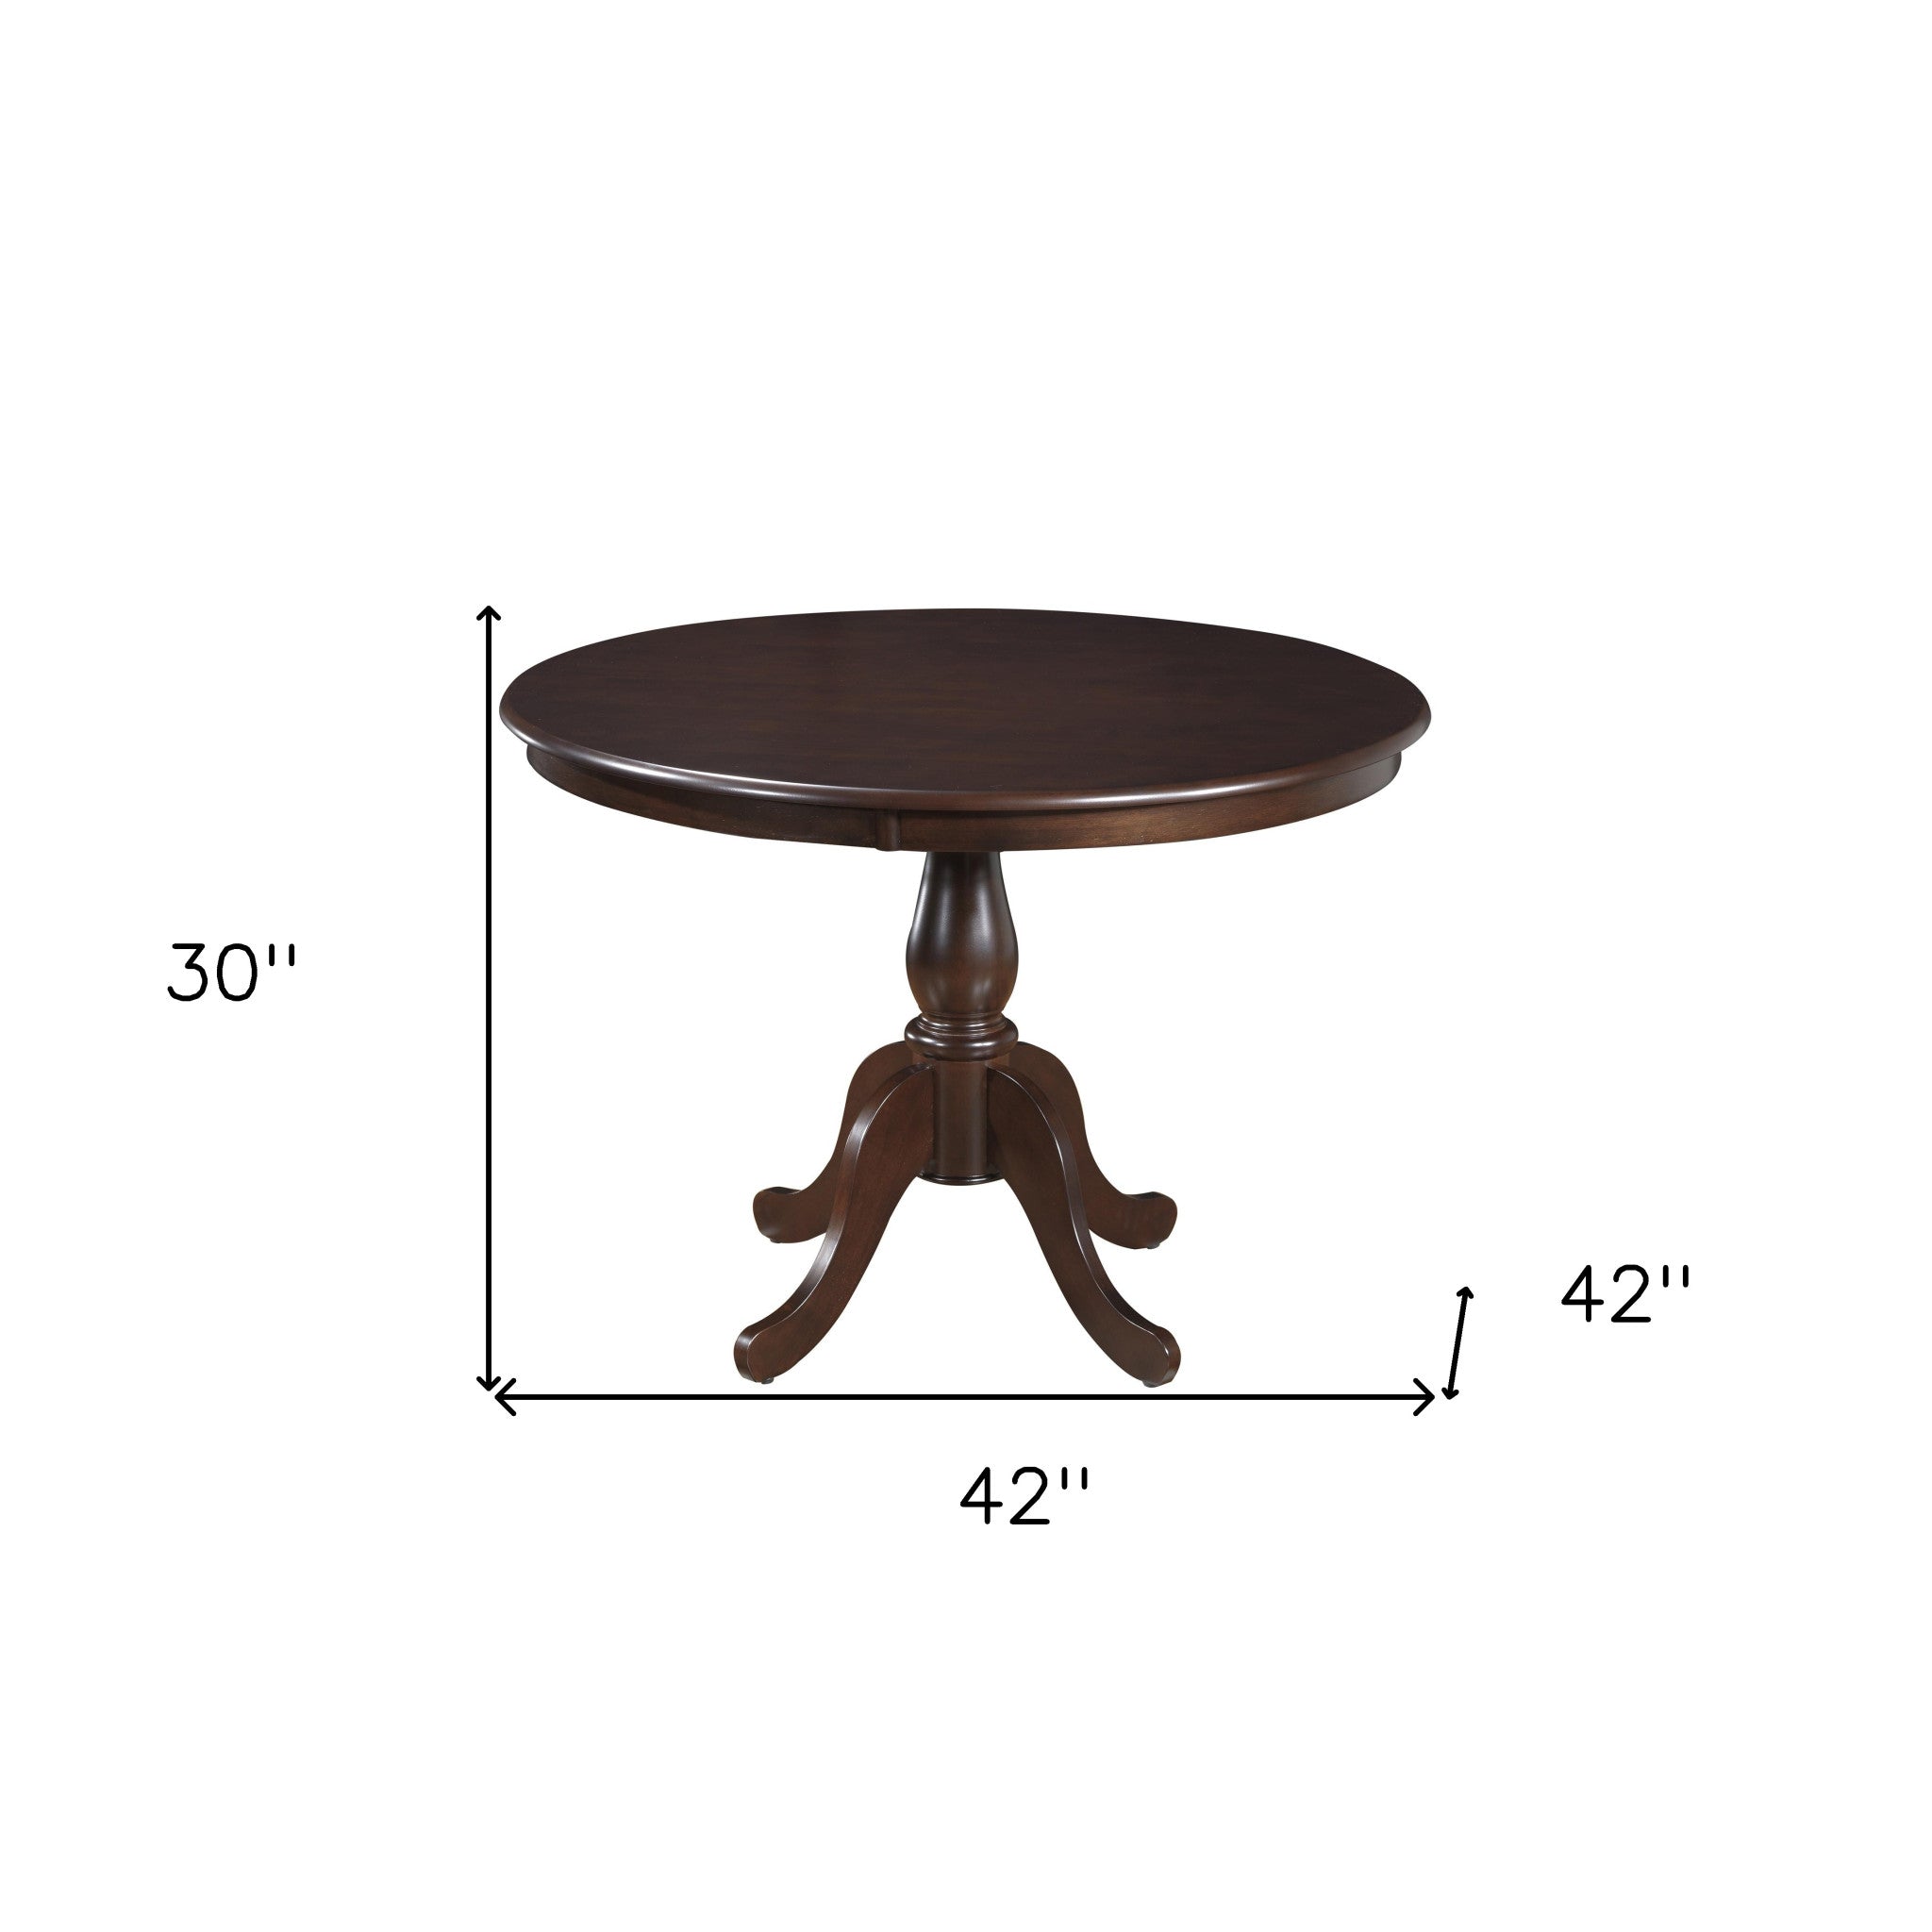 42" Espresso Brown Round Turned Pedestal Base Wood Dining Table